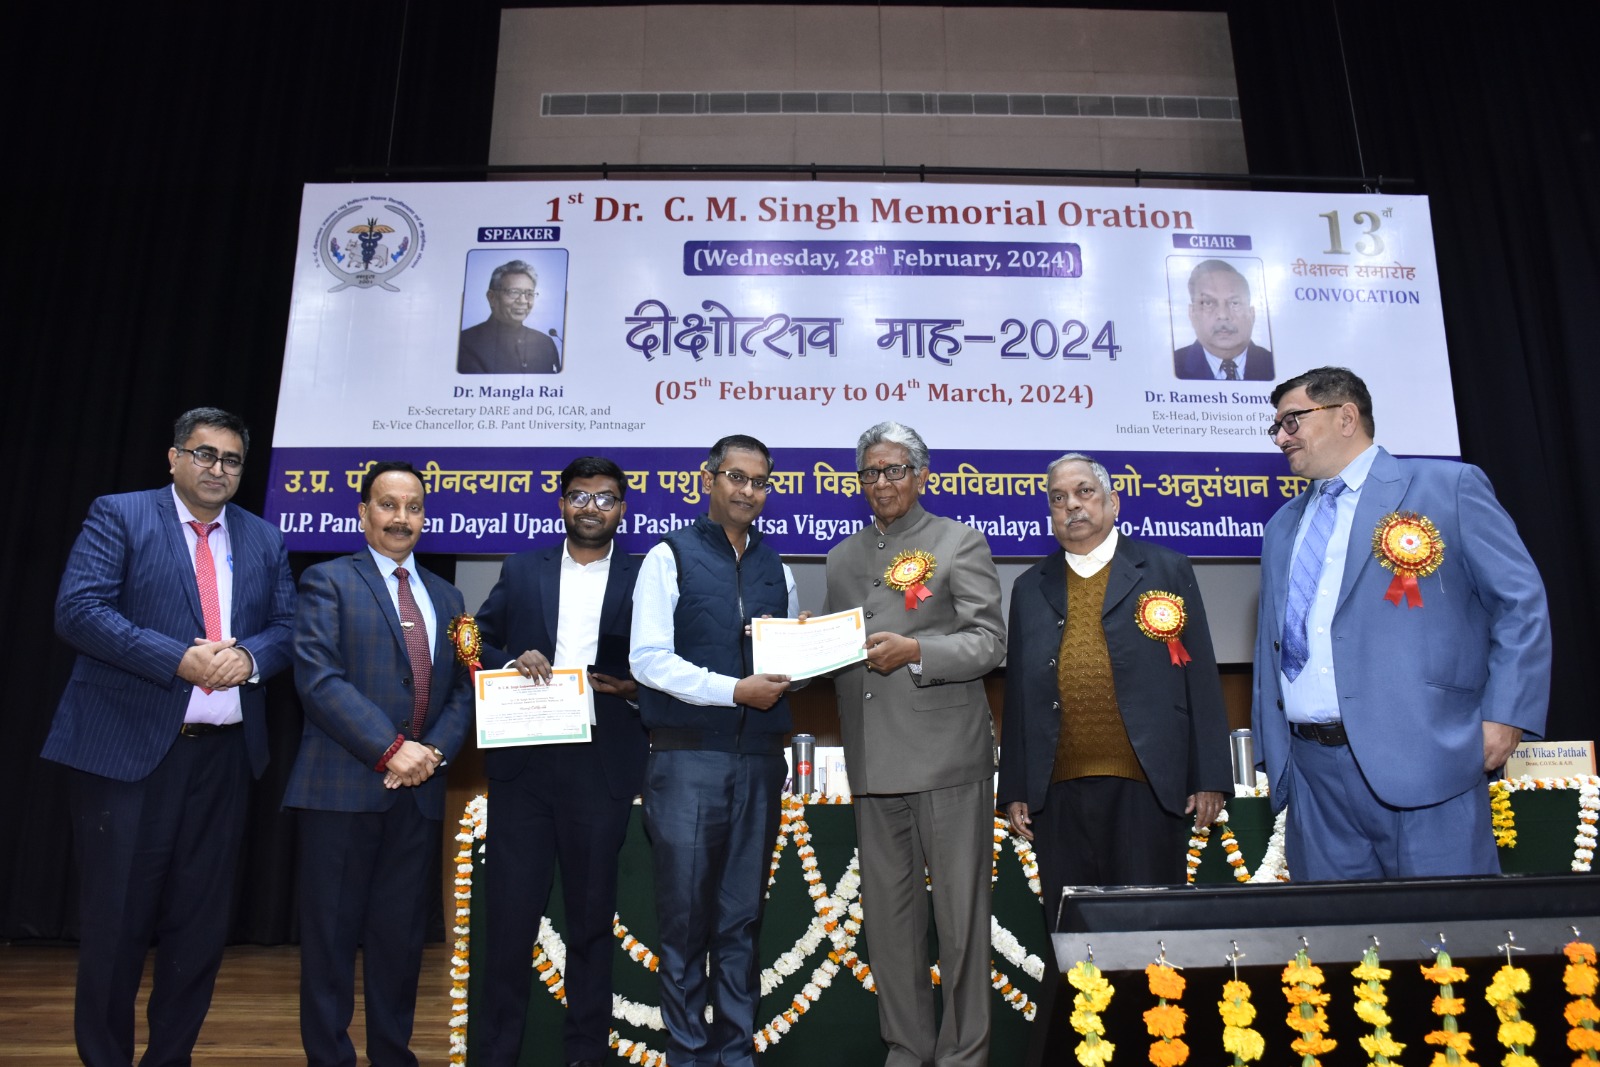 1st Dr. C. M. Singh Memorial Oration By Dr. Mangala Rai and Chair by Dr. Ramesh Somvanshi Held on 28th february,2024